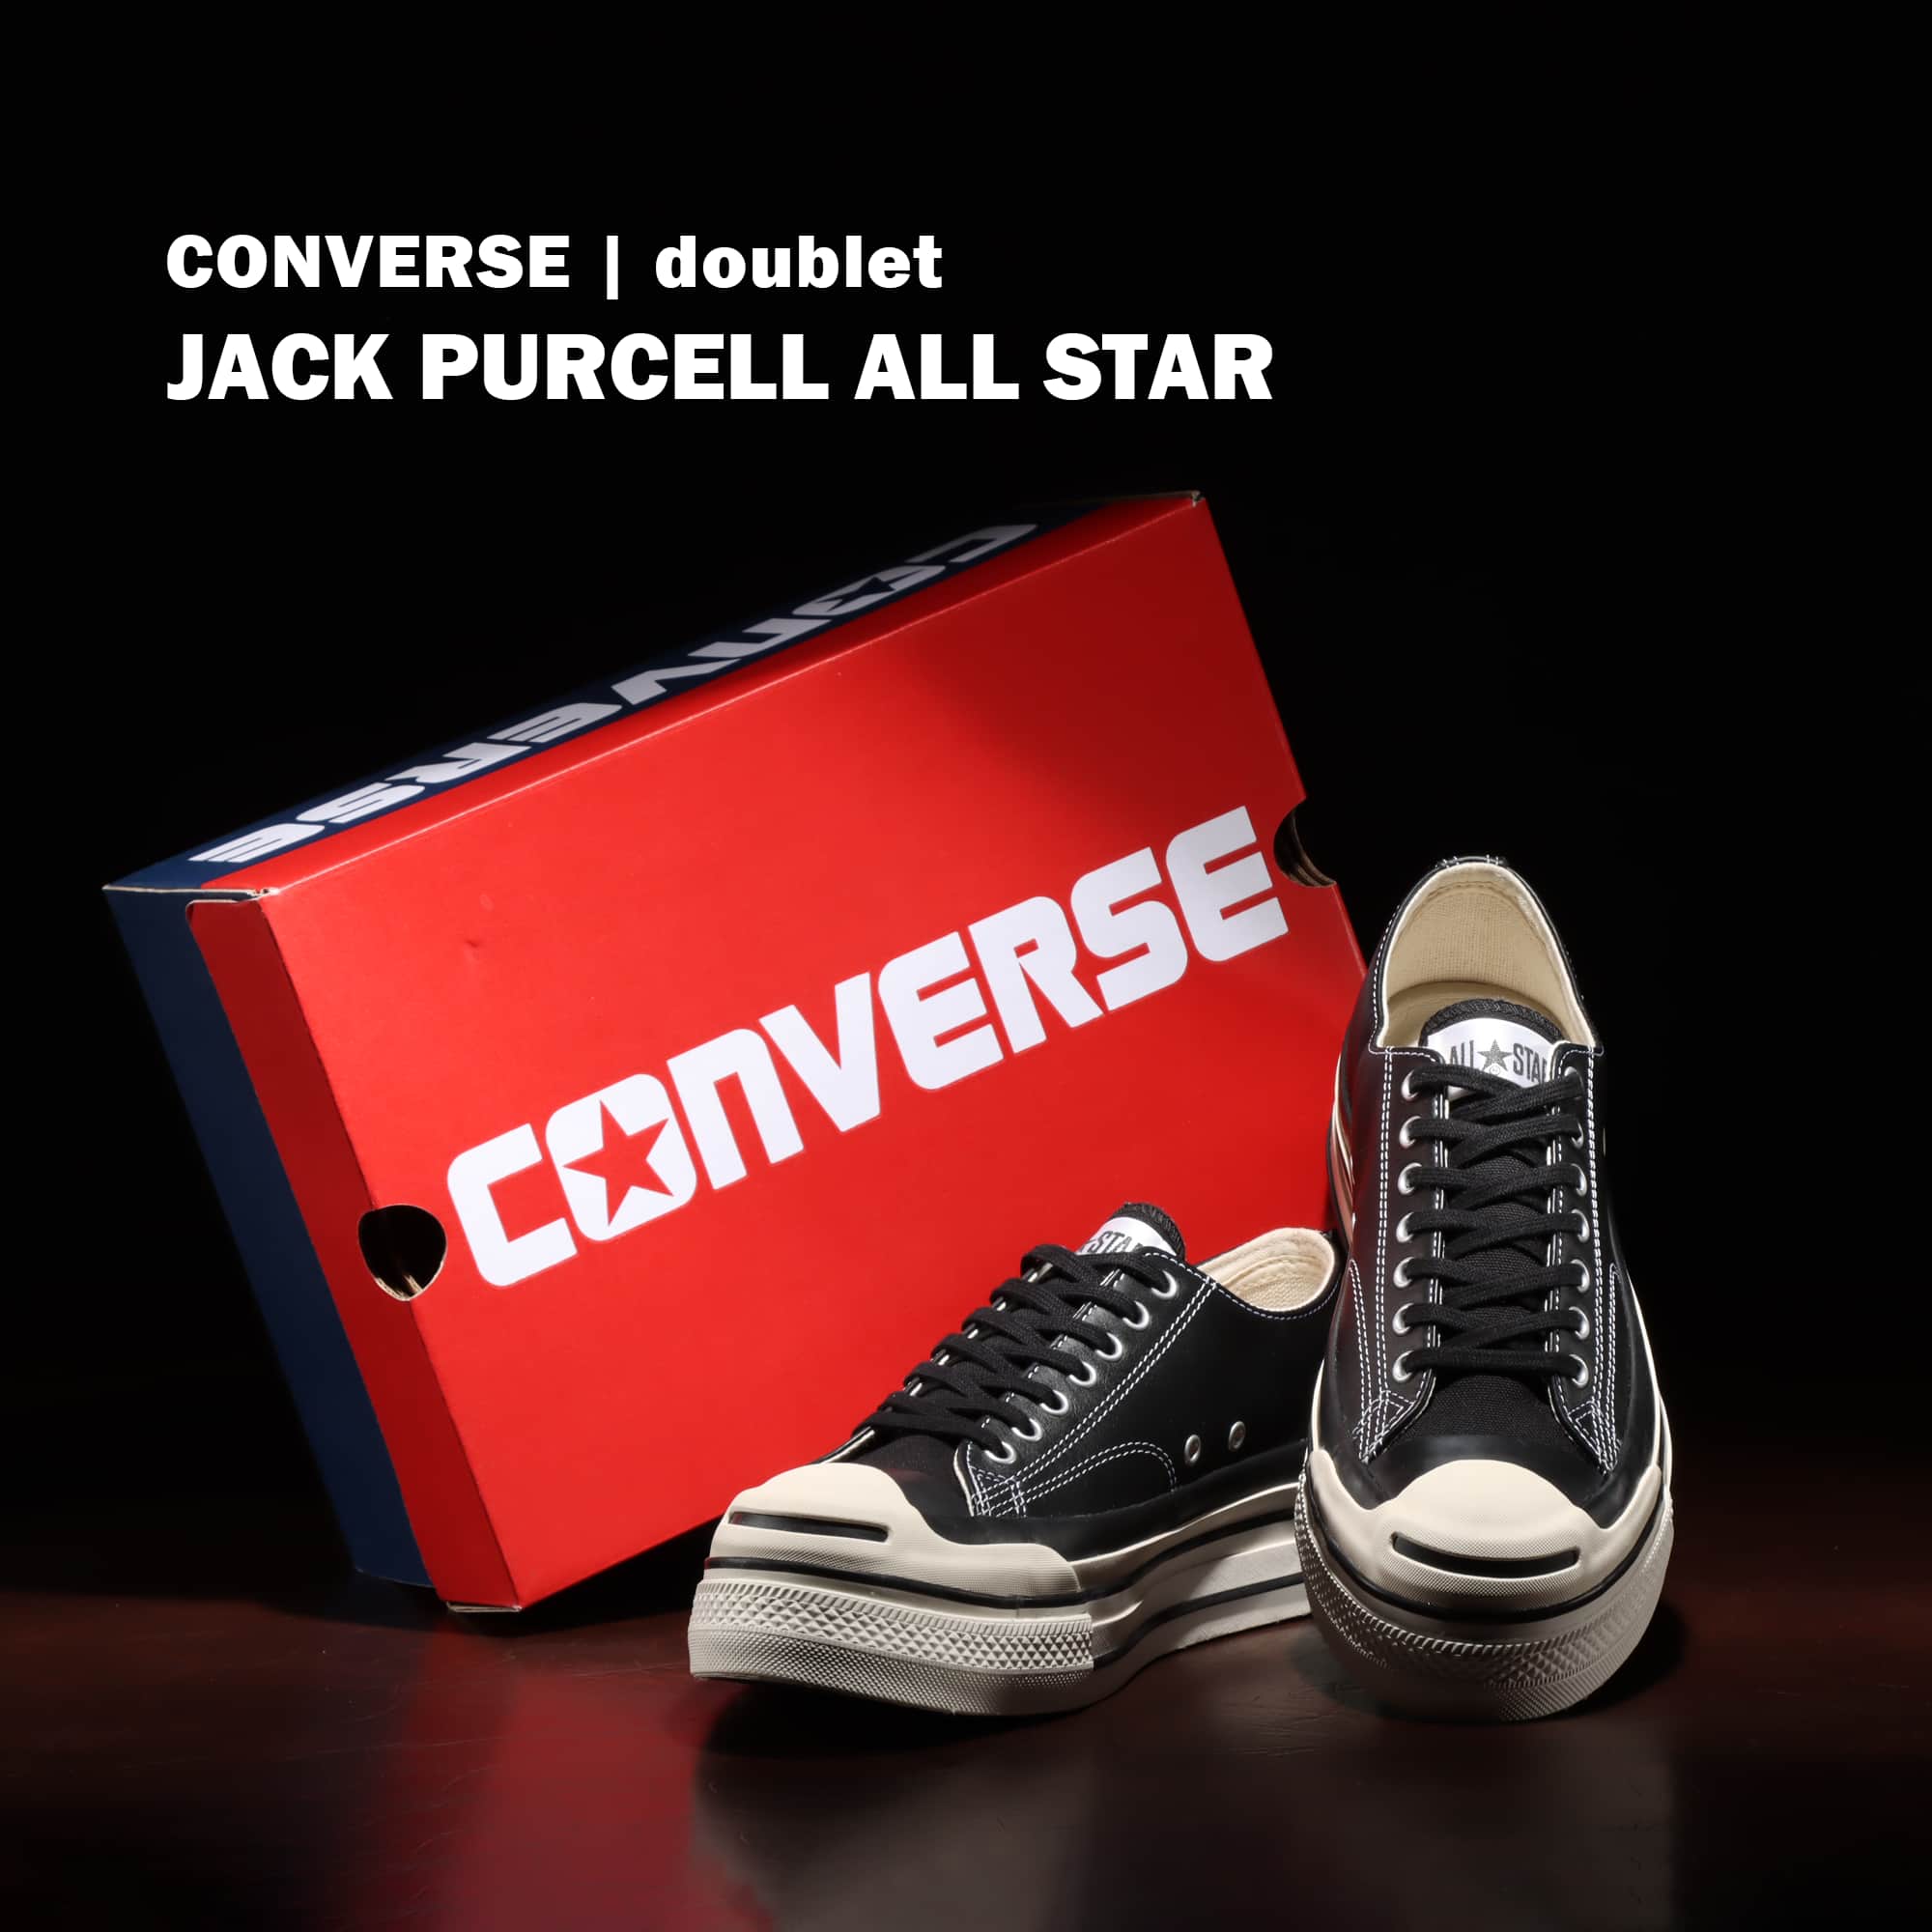 CONVERSE | doublet JACK PURCELL ALL STAR